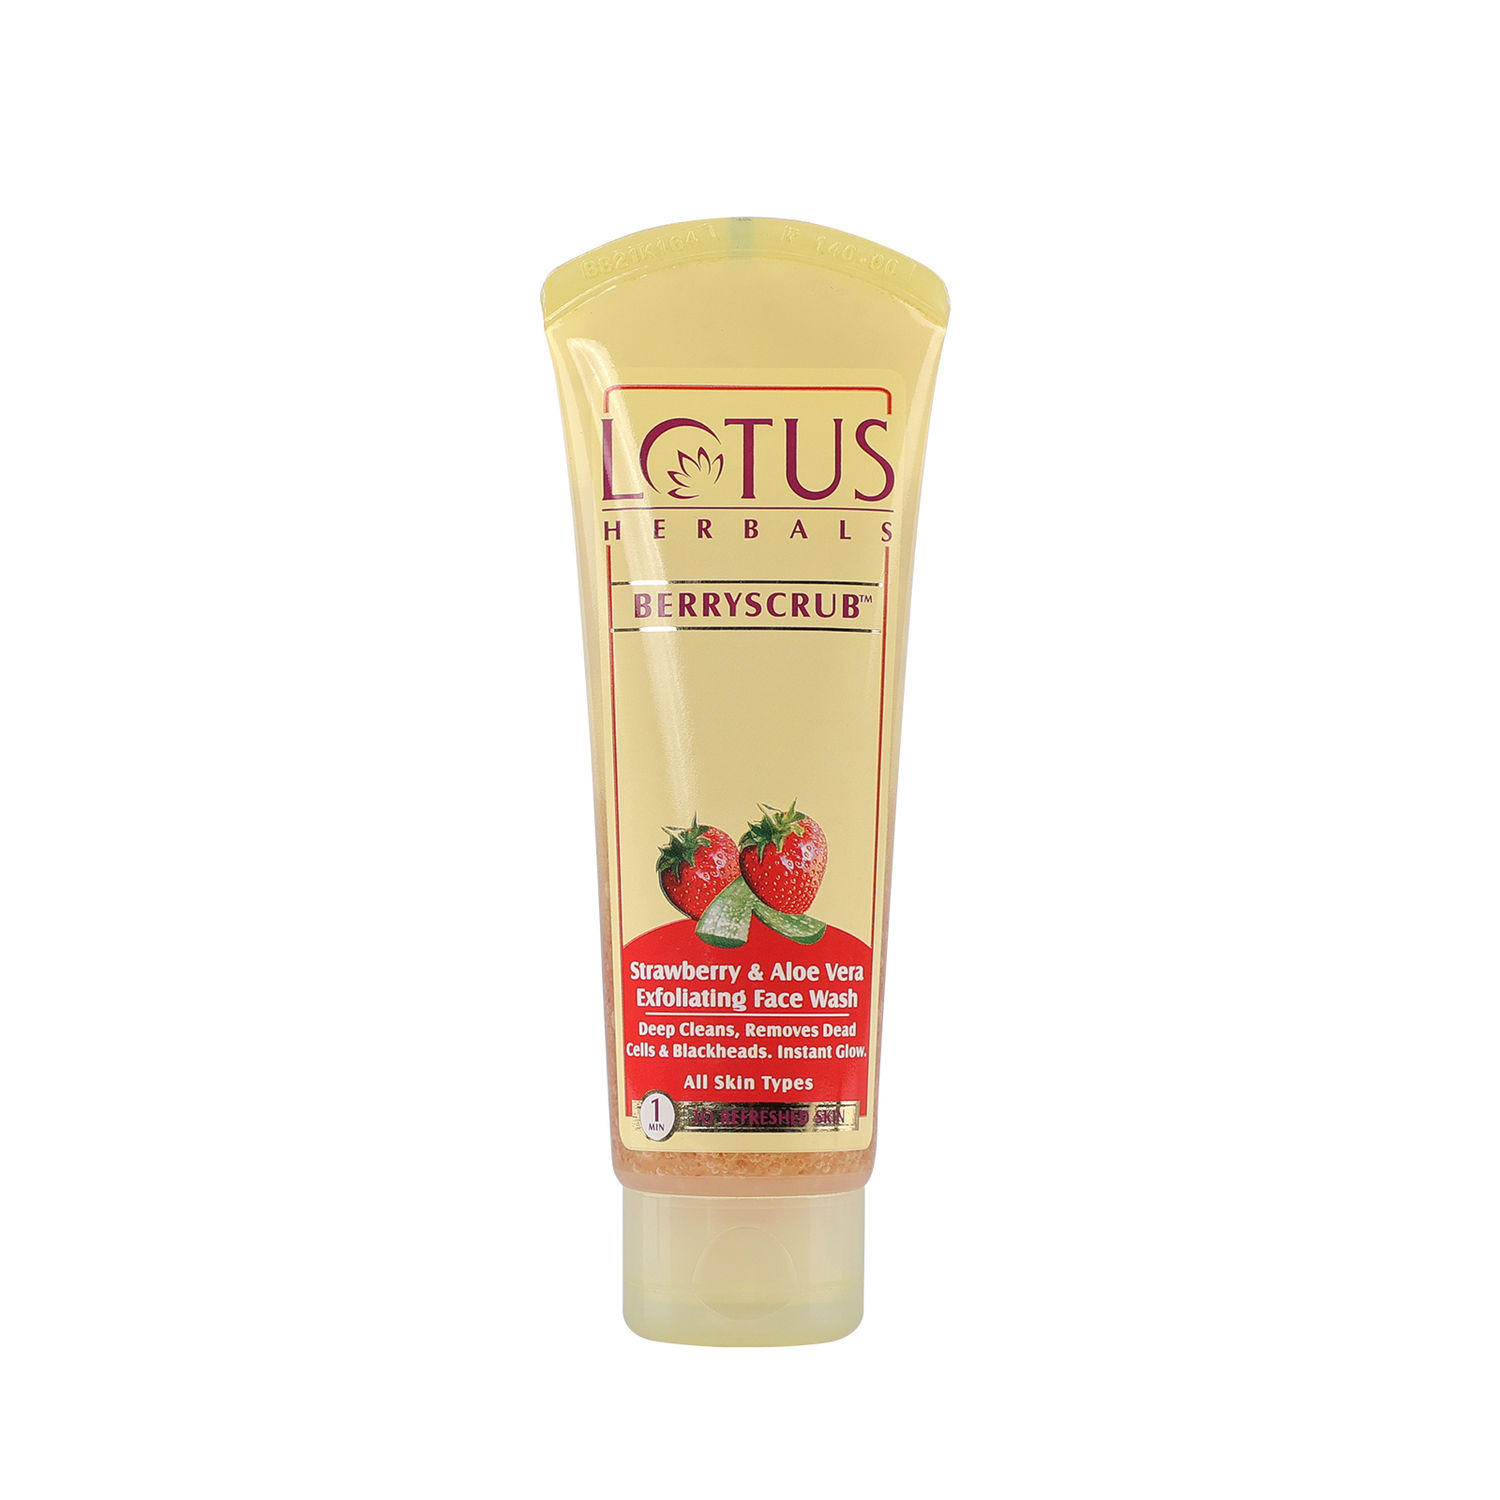 Buy Lotus Herbals Berryscrub Strawberry & Aloe Vera Exfoliating Face Wash | Deep Cleaning | Blackhead Removal | For All Skin Types | 120g - Purplle